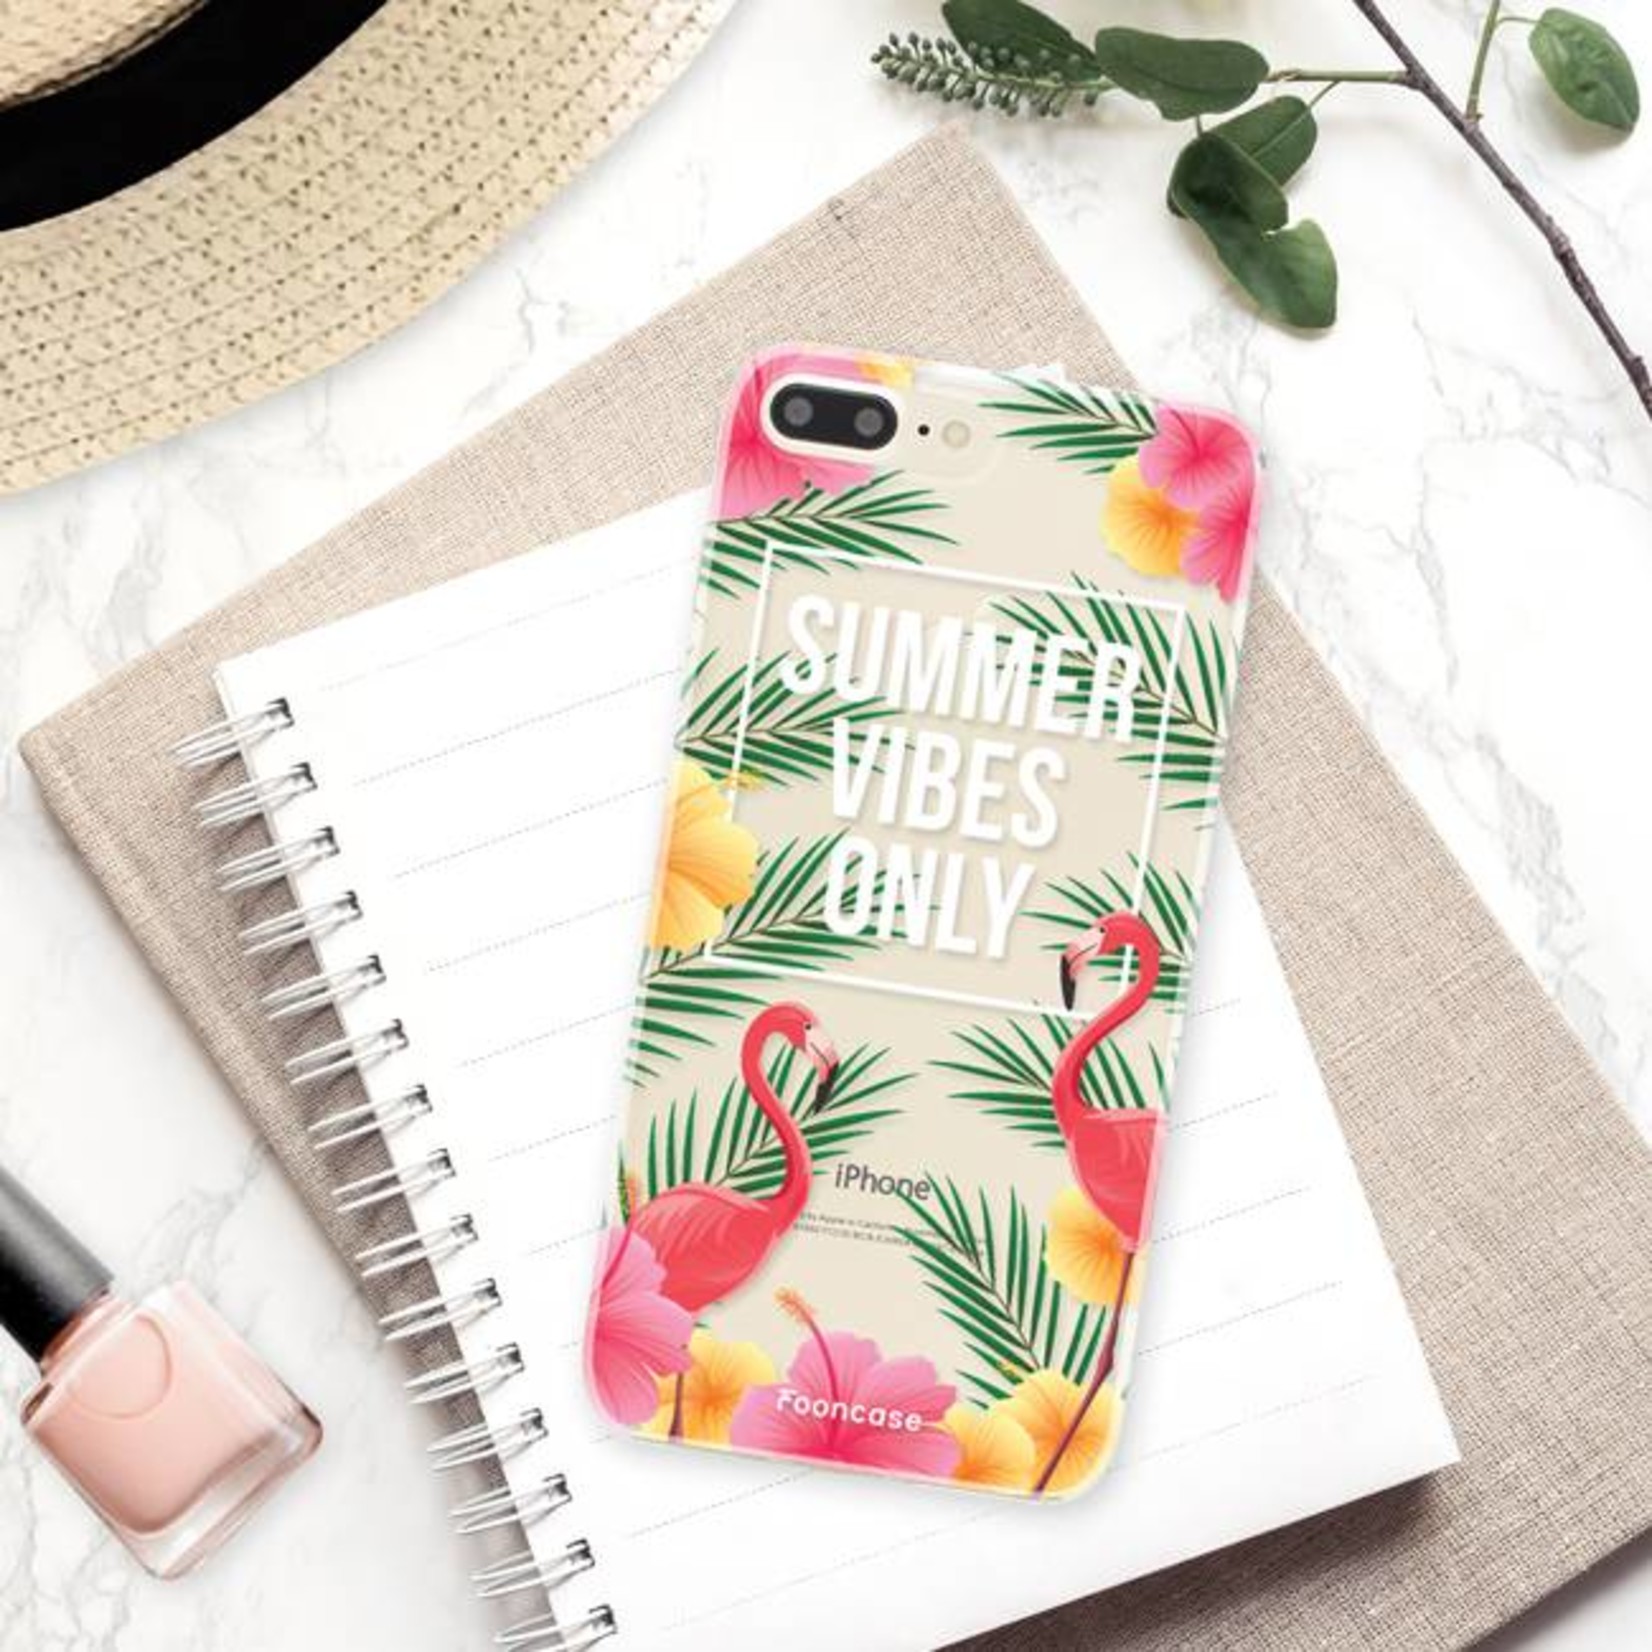 FOONCASE Iphone 8 Plus Handyhülle - Summer Vibes Only